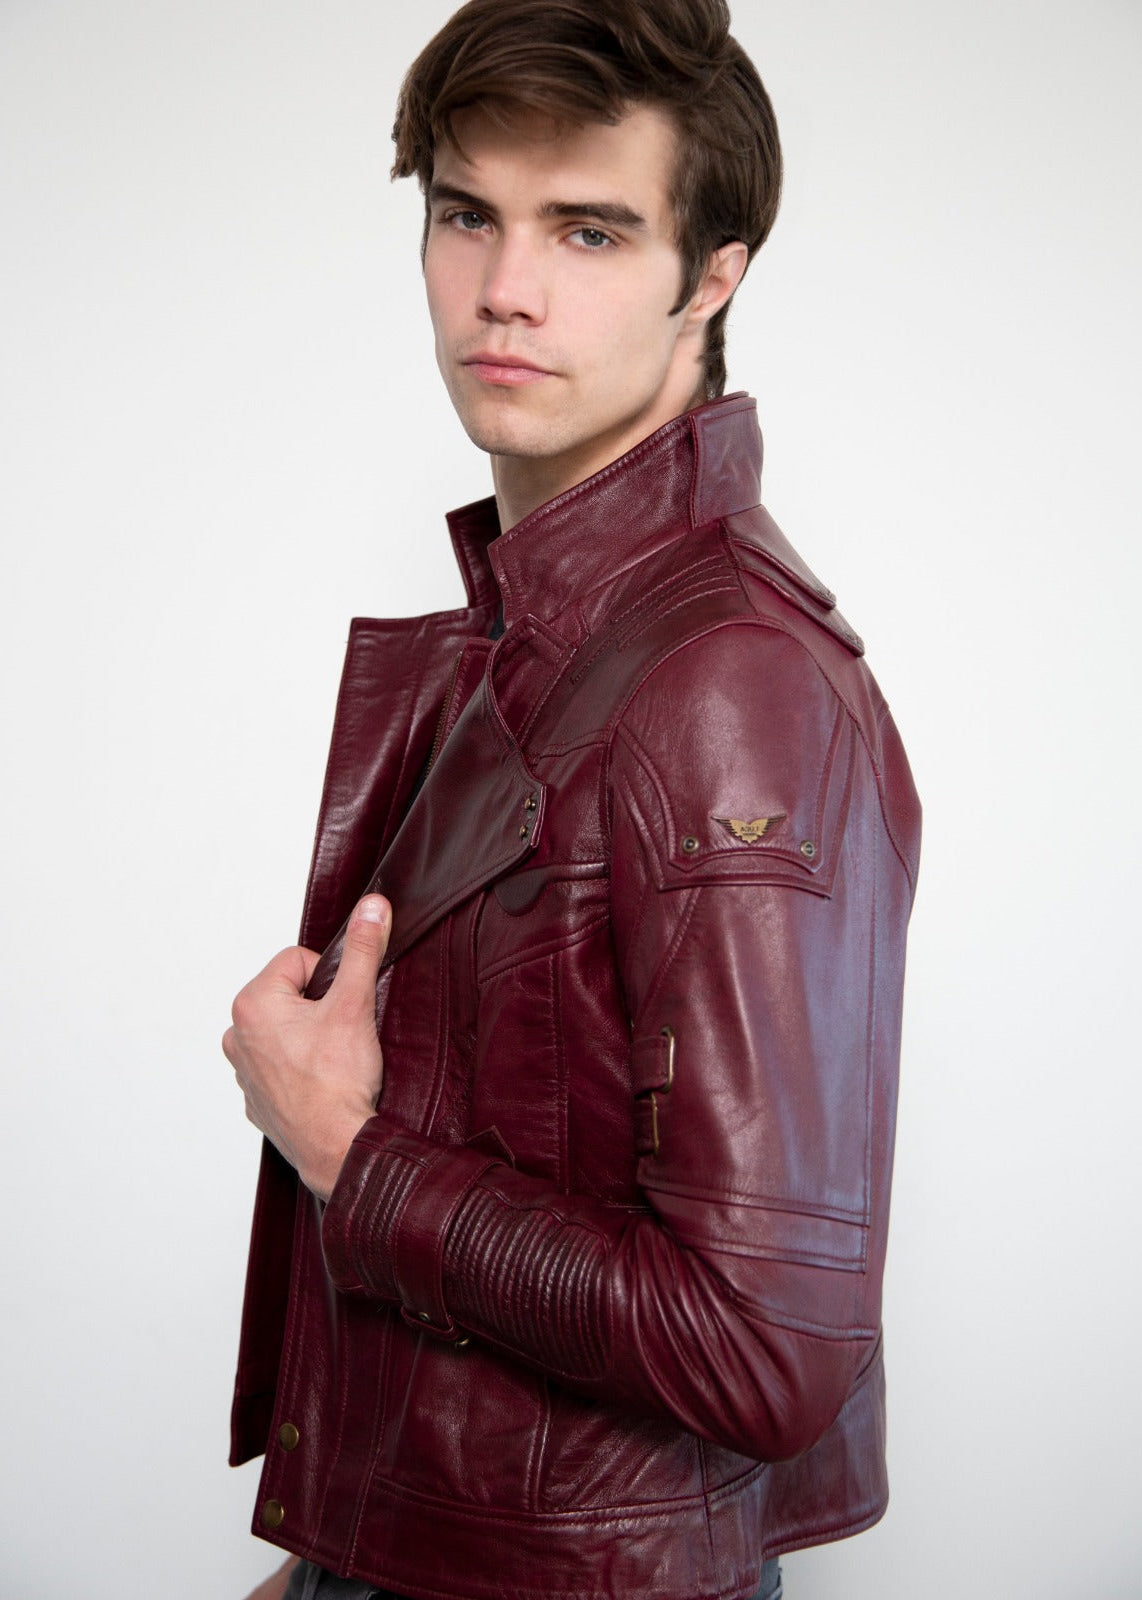 star lord peter quill marvel cosplay guardians of the galaxy dark red leather jacket